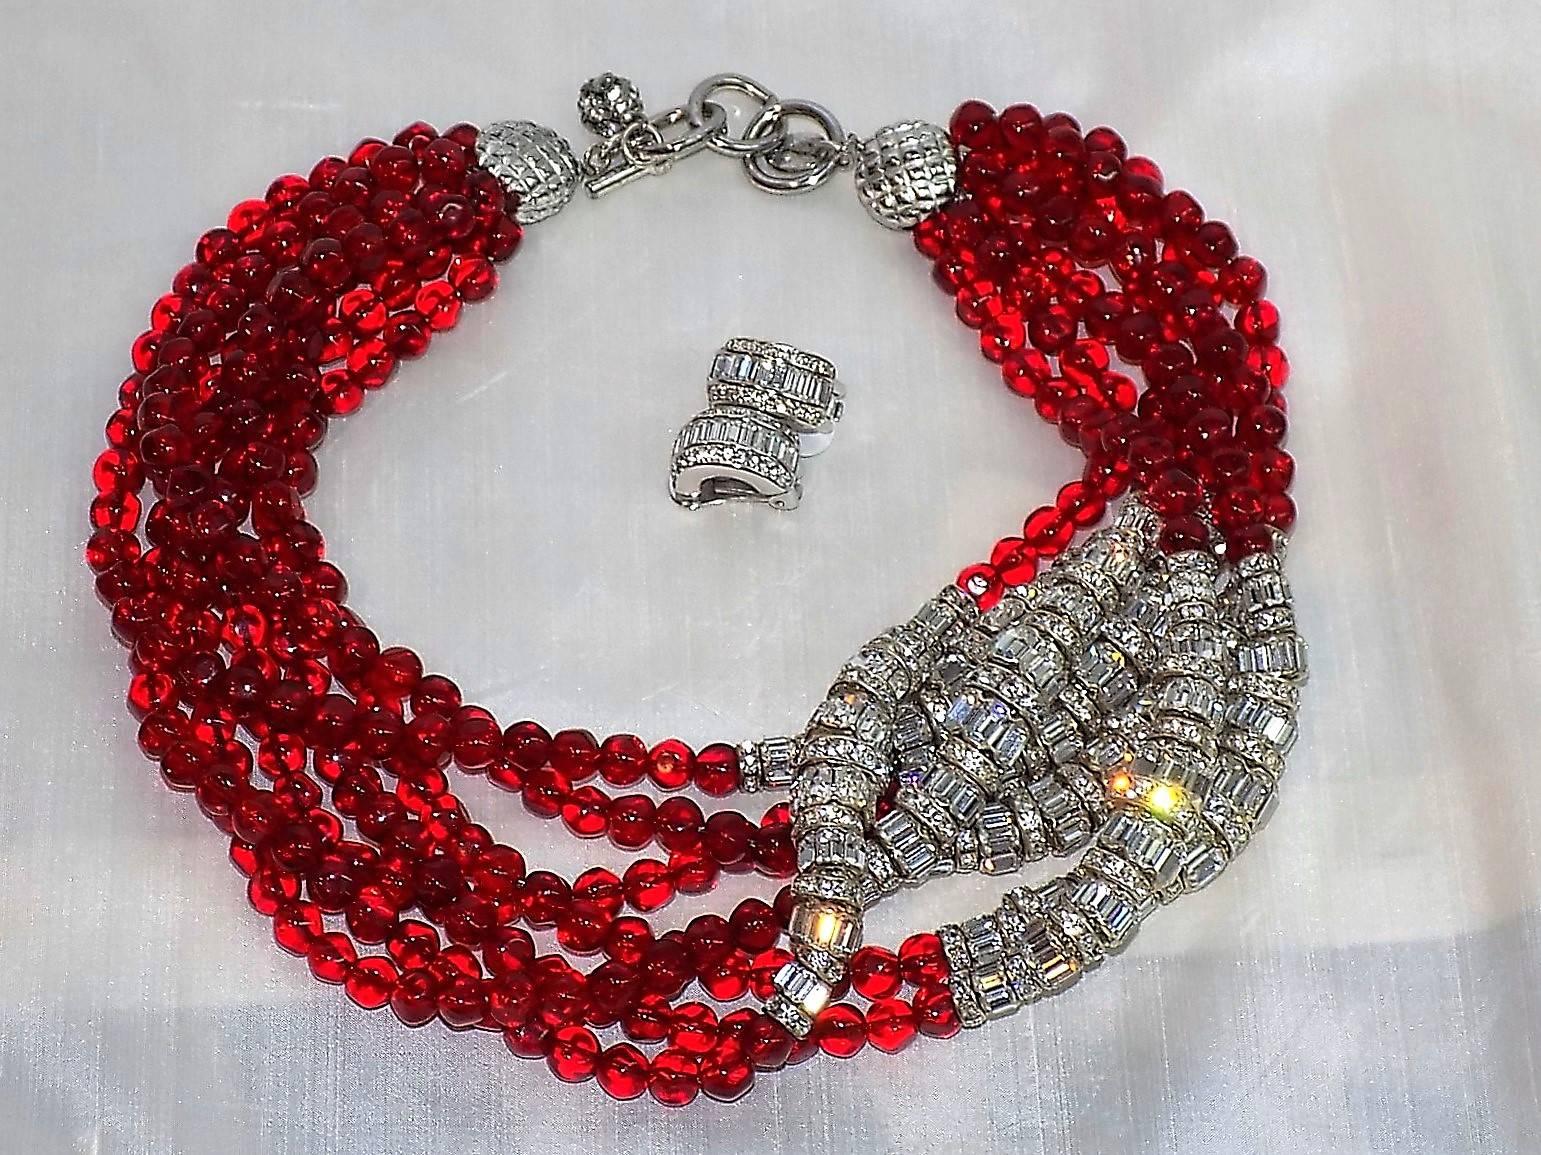 Vintage Anne Klein Couture divine massive 7 rows ruby red glass beads Necklace 5